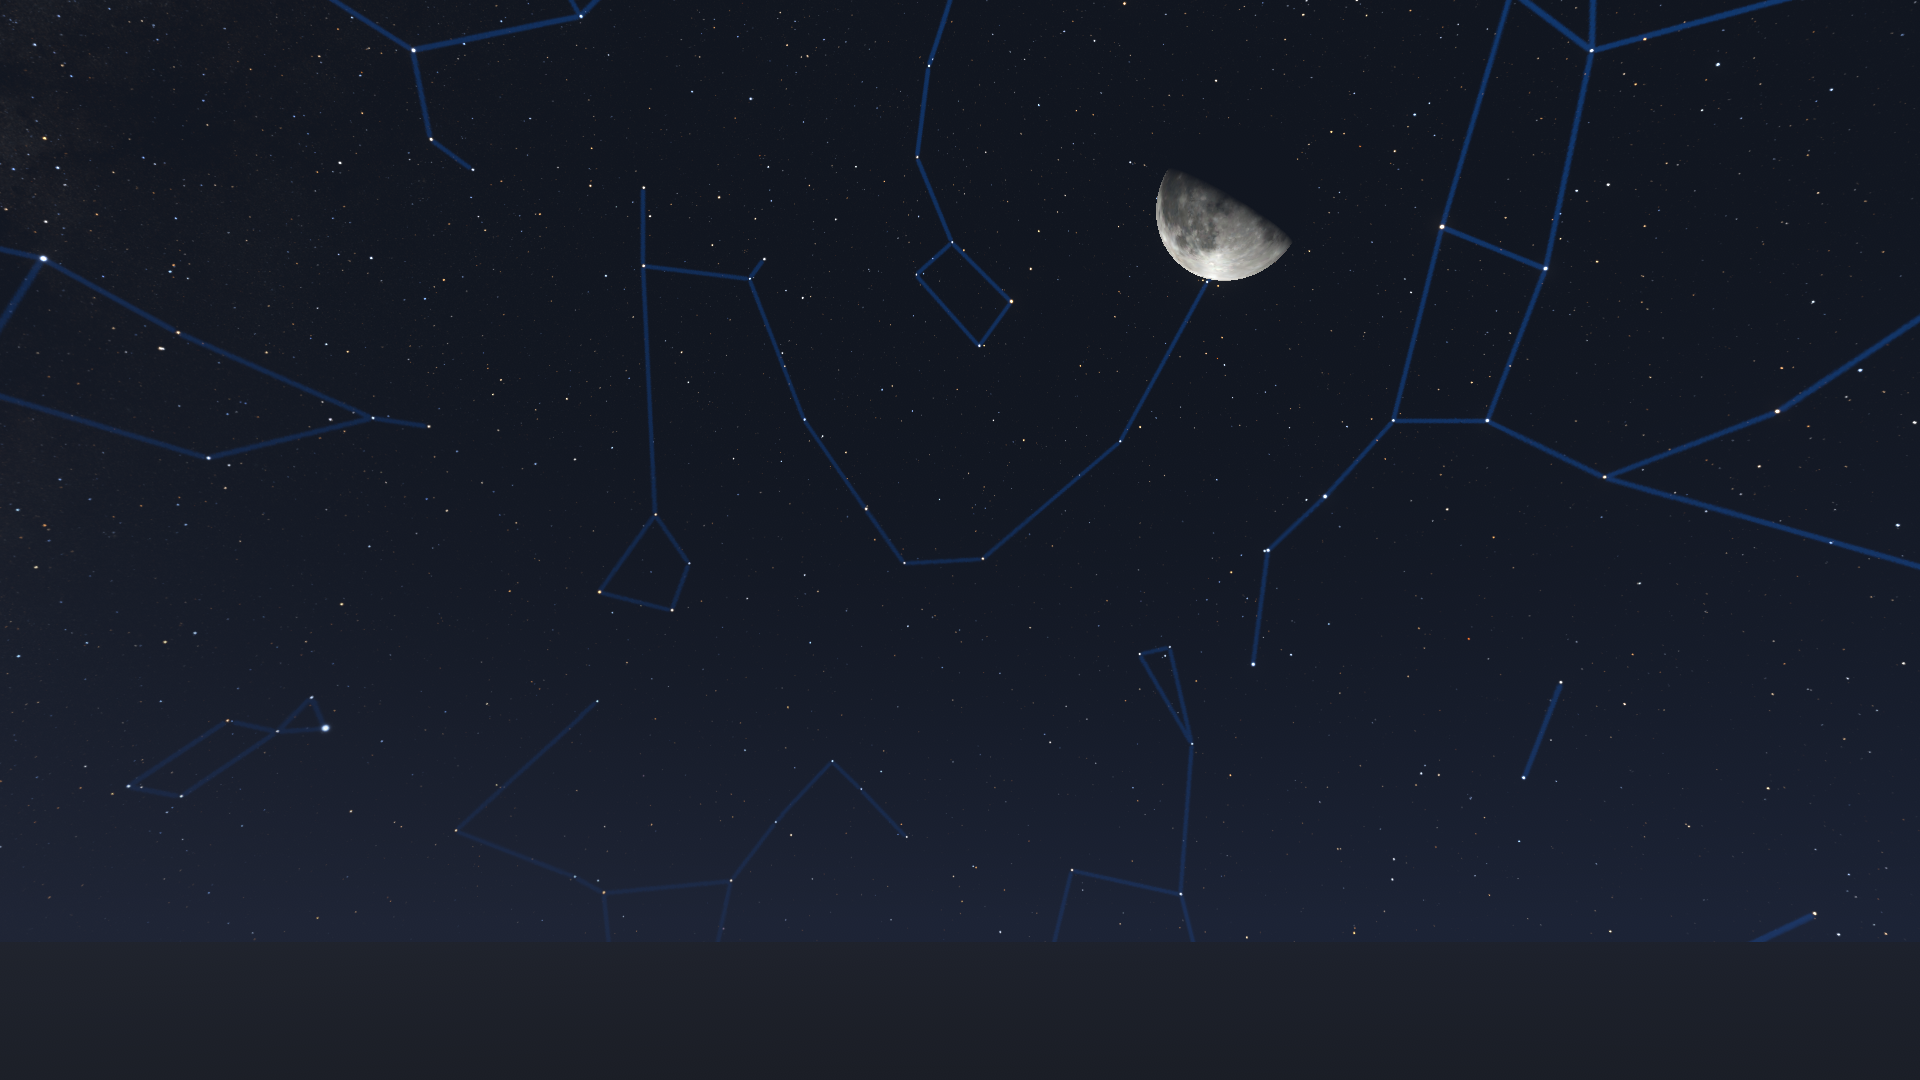 The night sky with constellations, Ursa Minor can be seen at the top.